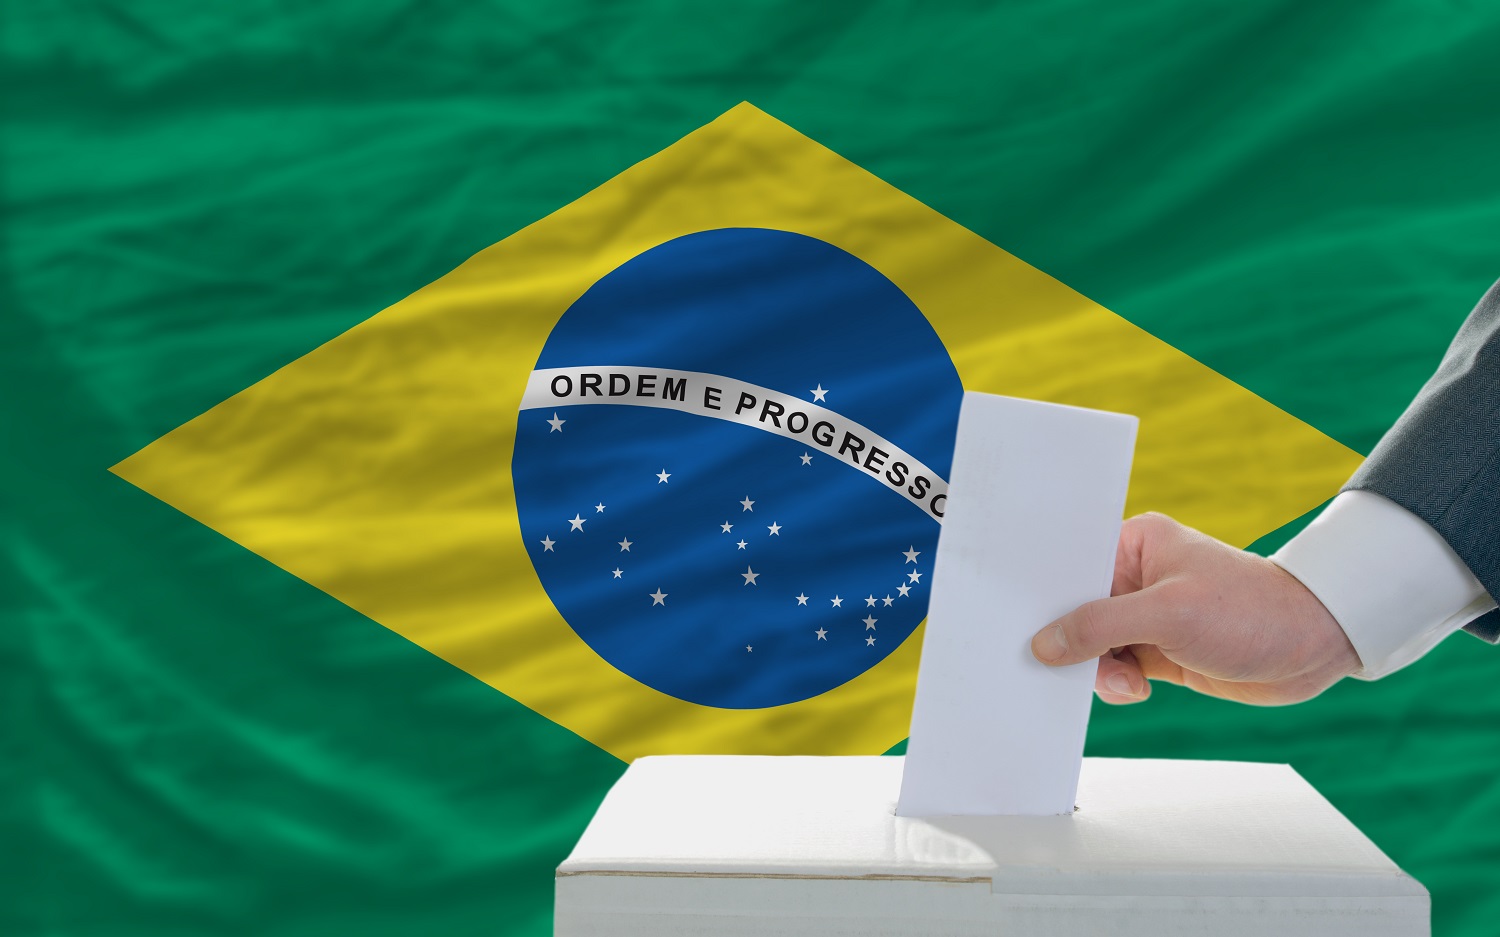 A man places a voting slip into a ballot box against the backdrop of the Brazilian flag.